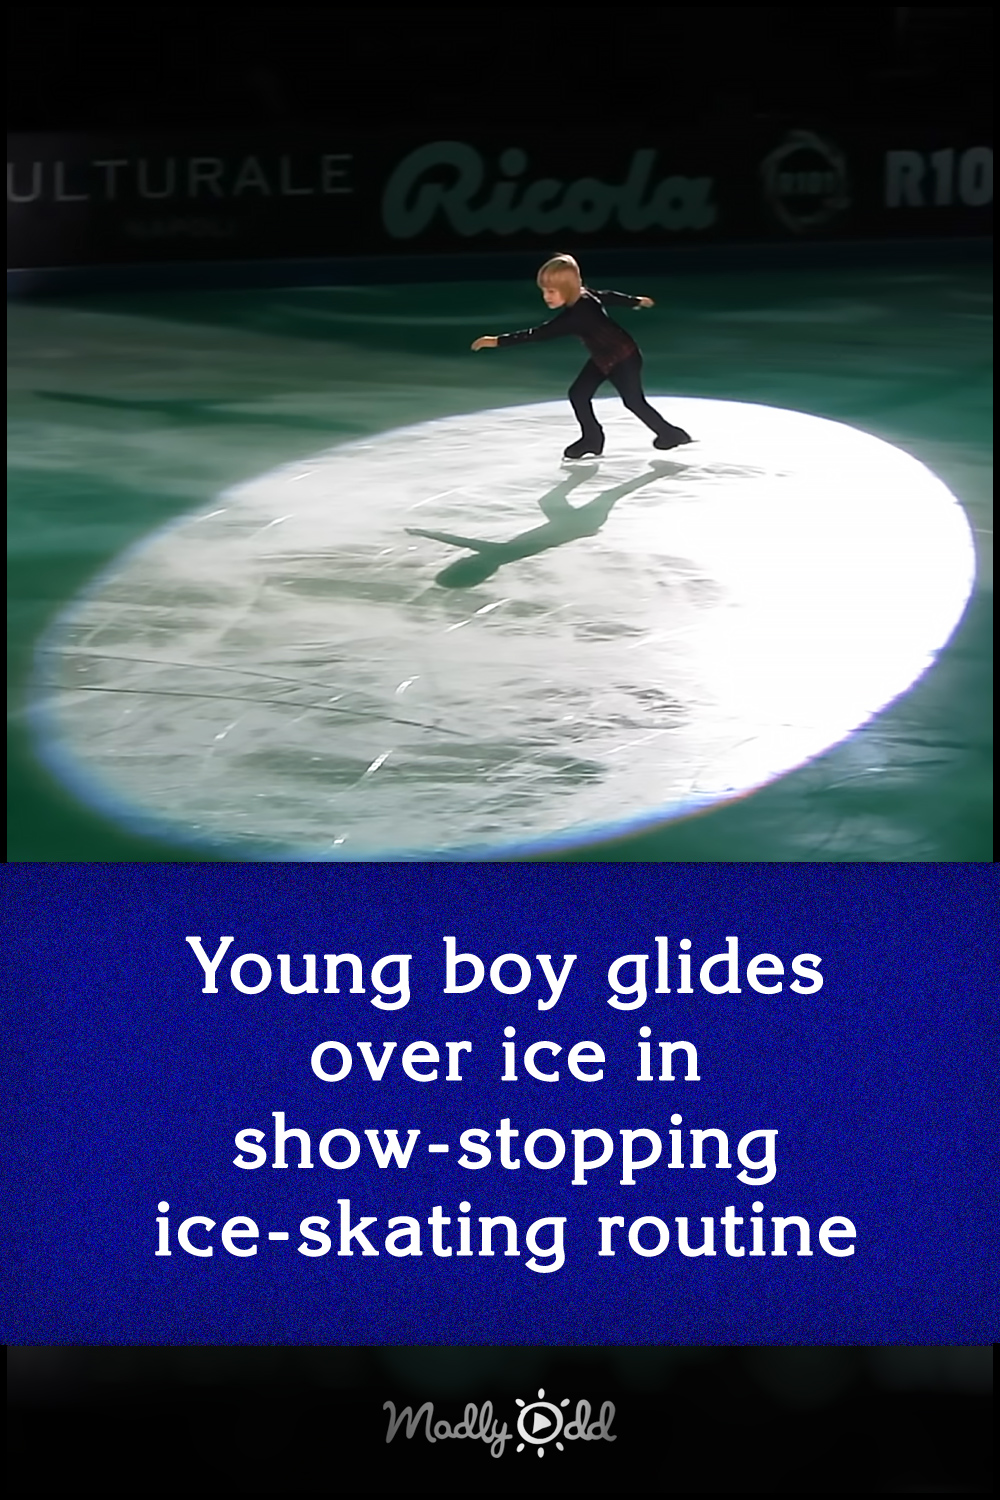 Young boy glides over ice in show-stopping ice-skating routine